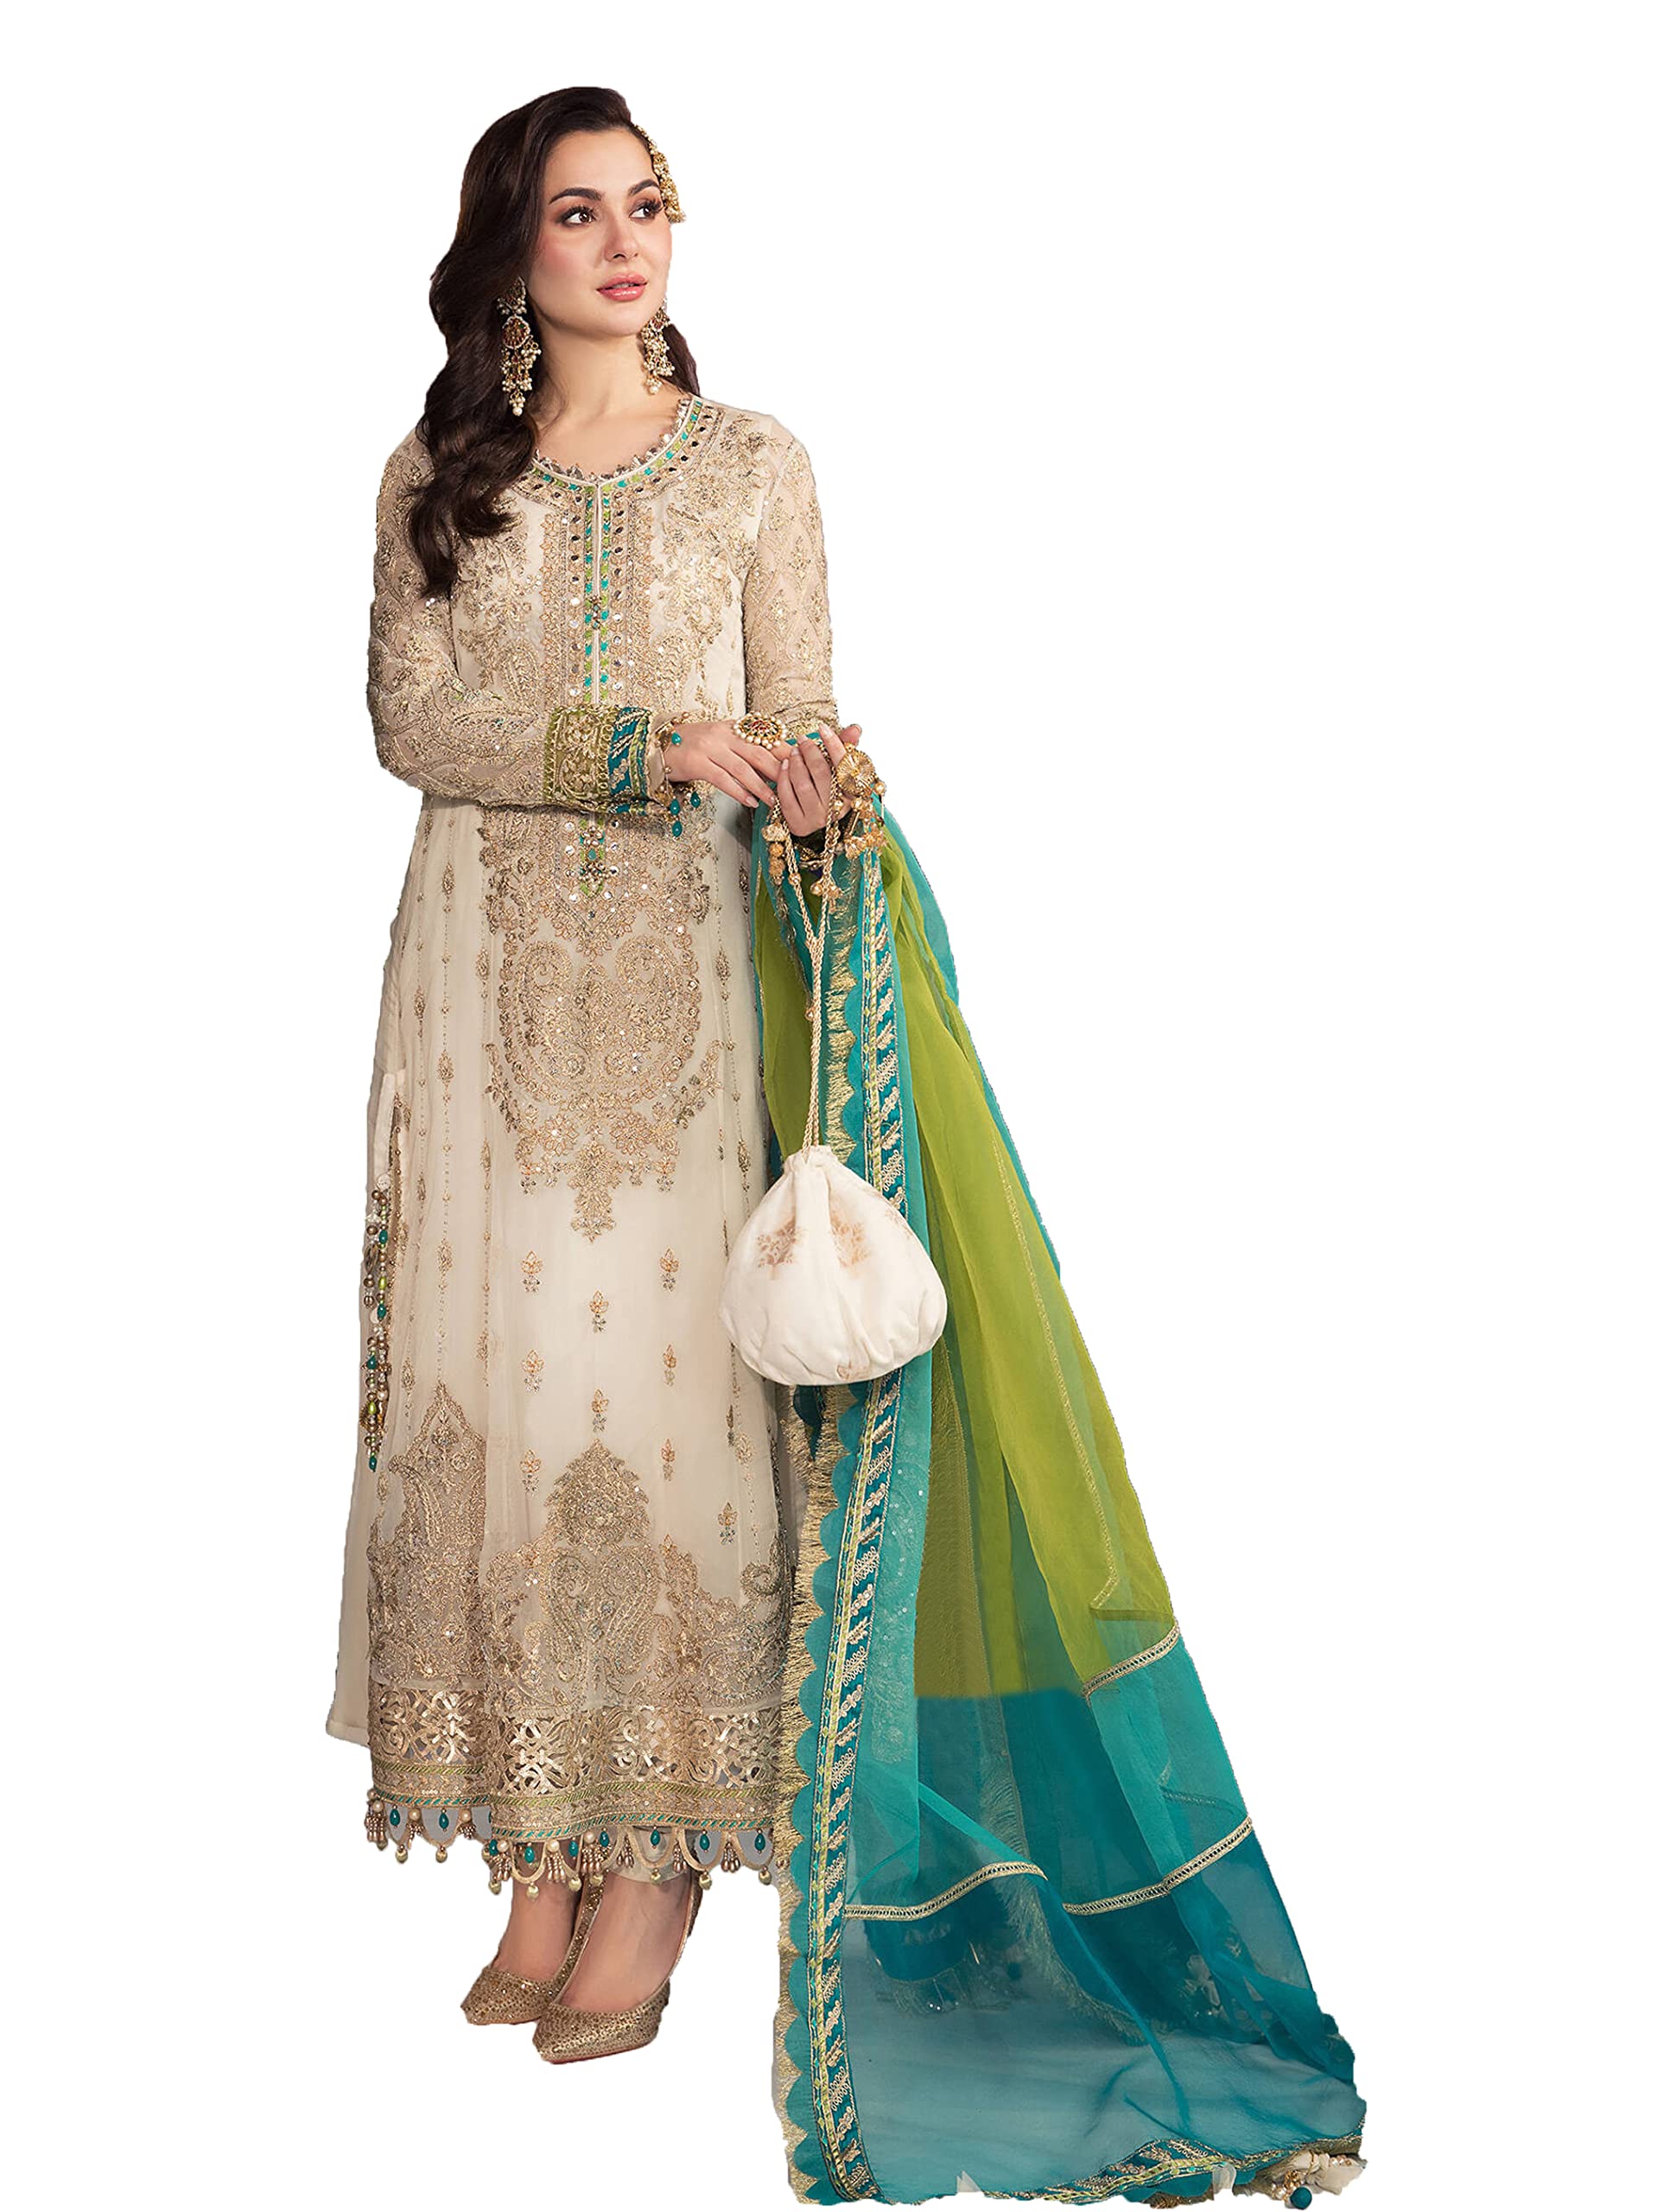 STELLACOUTURE indian pakistani eid festival embroidered ready to wear palazzo style salwar kameez suit for women 9115-O